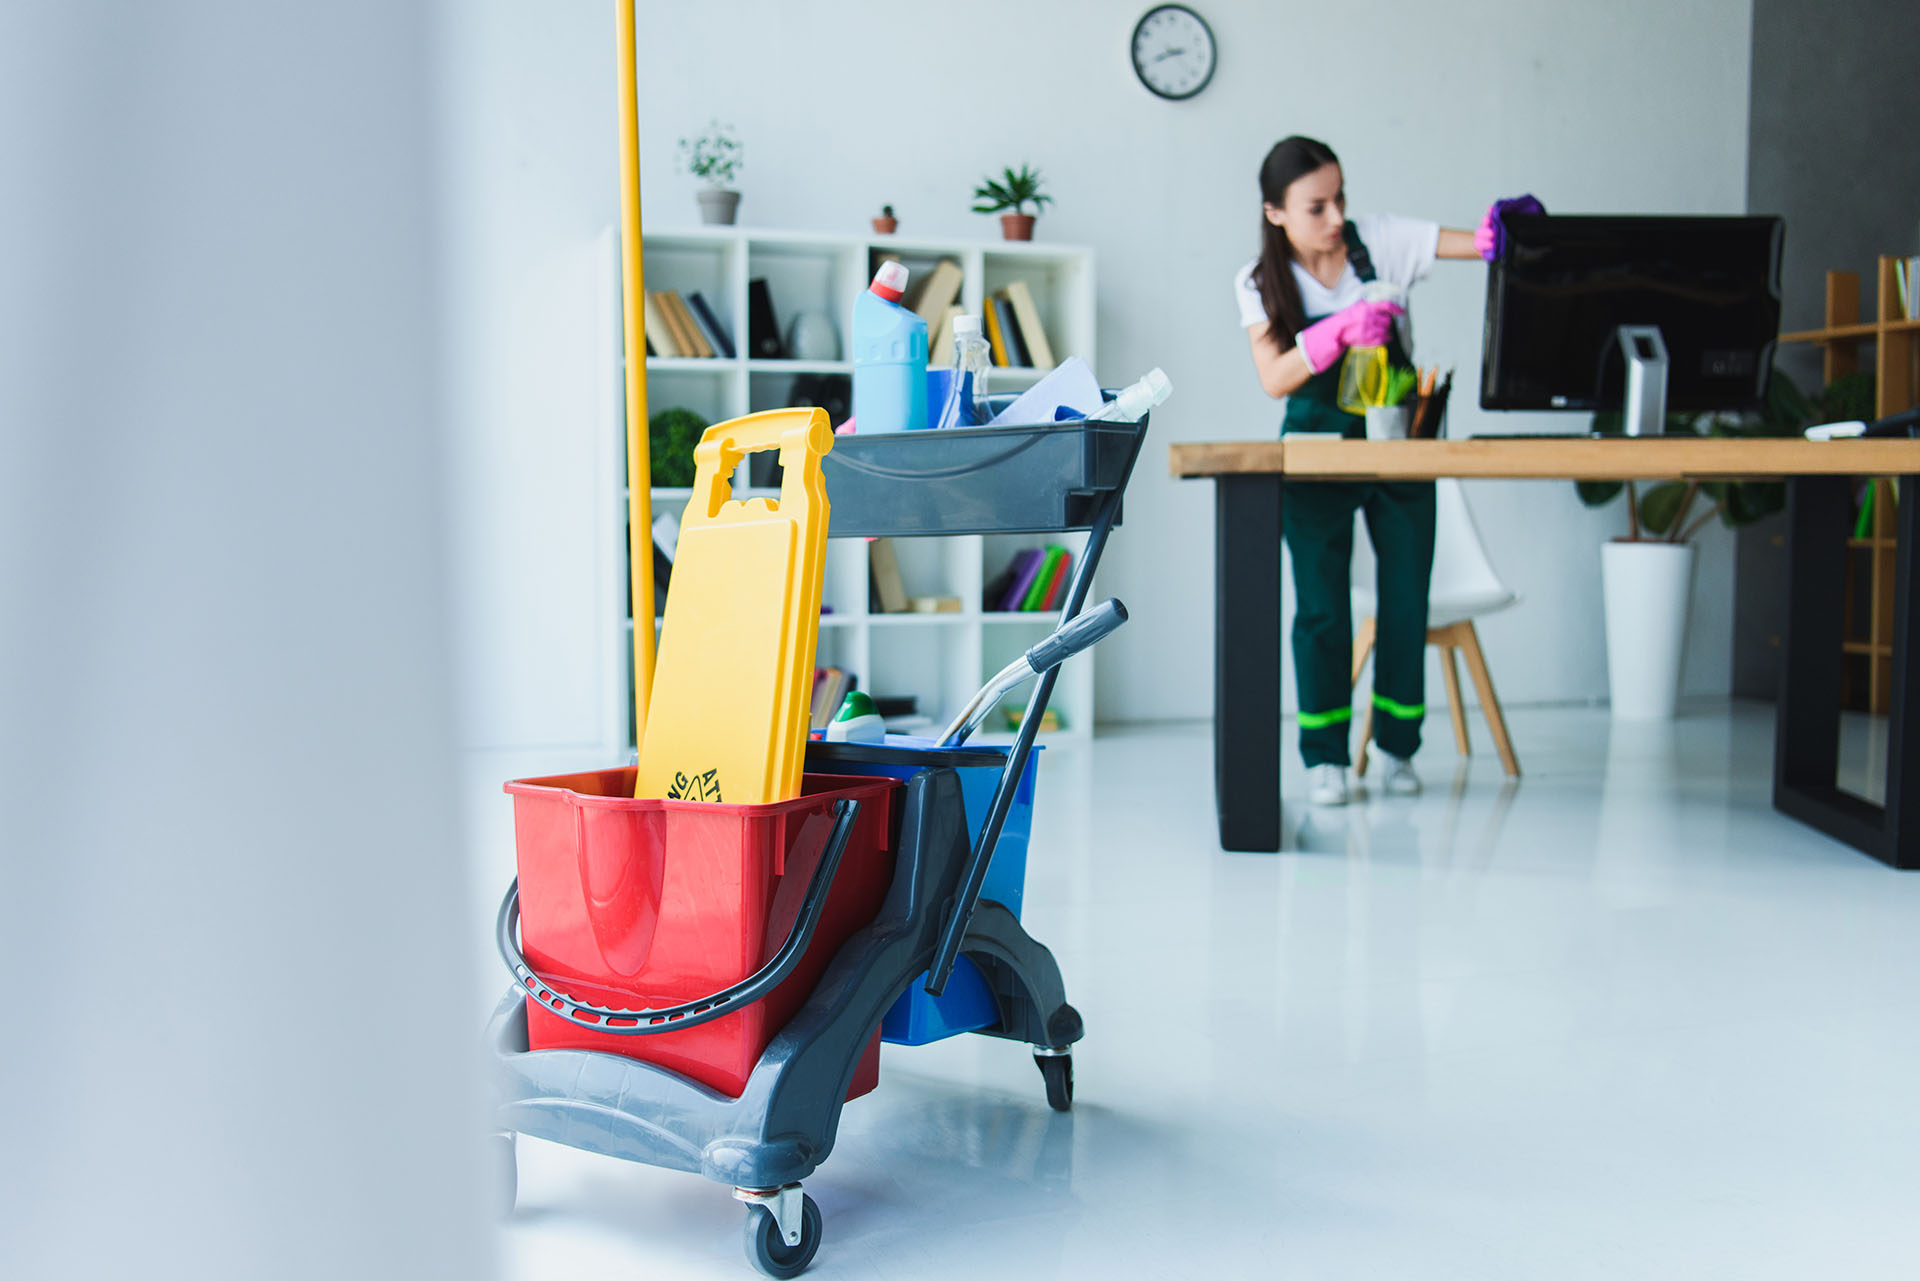 young-female-janitor-cleaning-office-with-various-2021-08-29-22-36-48-utc.jpg